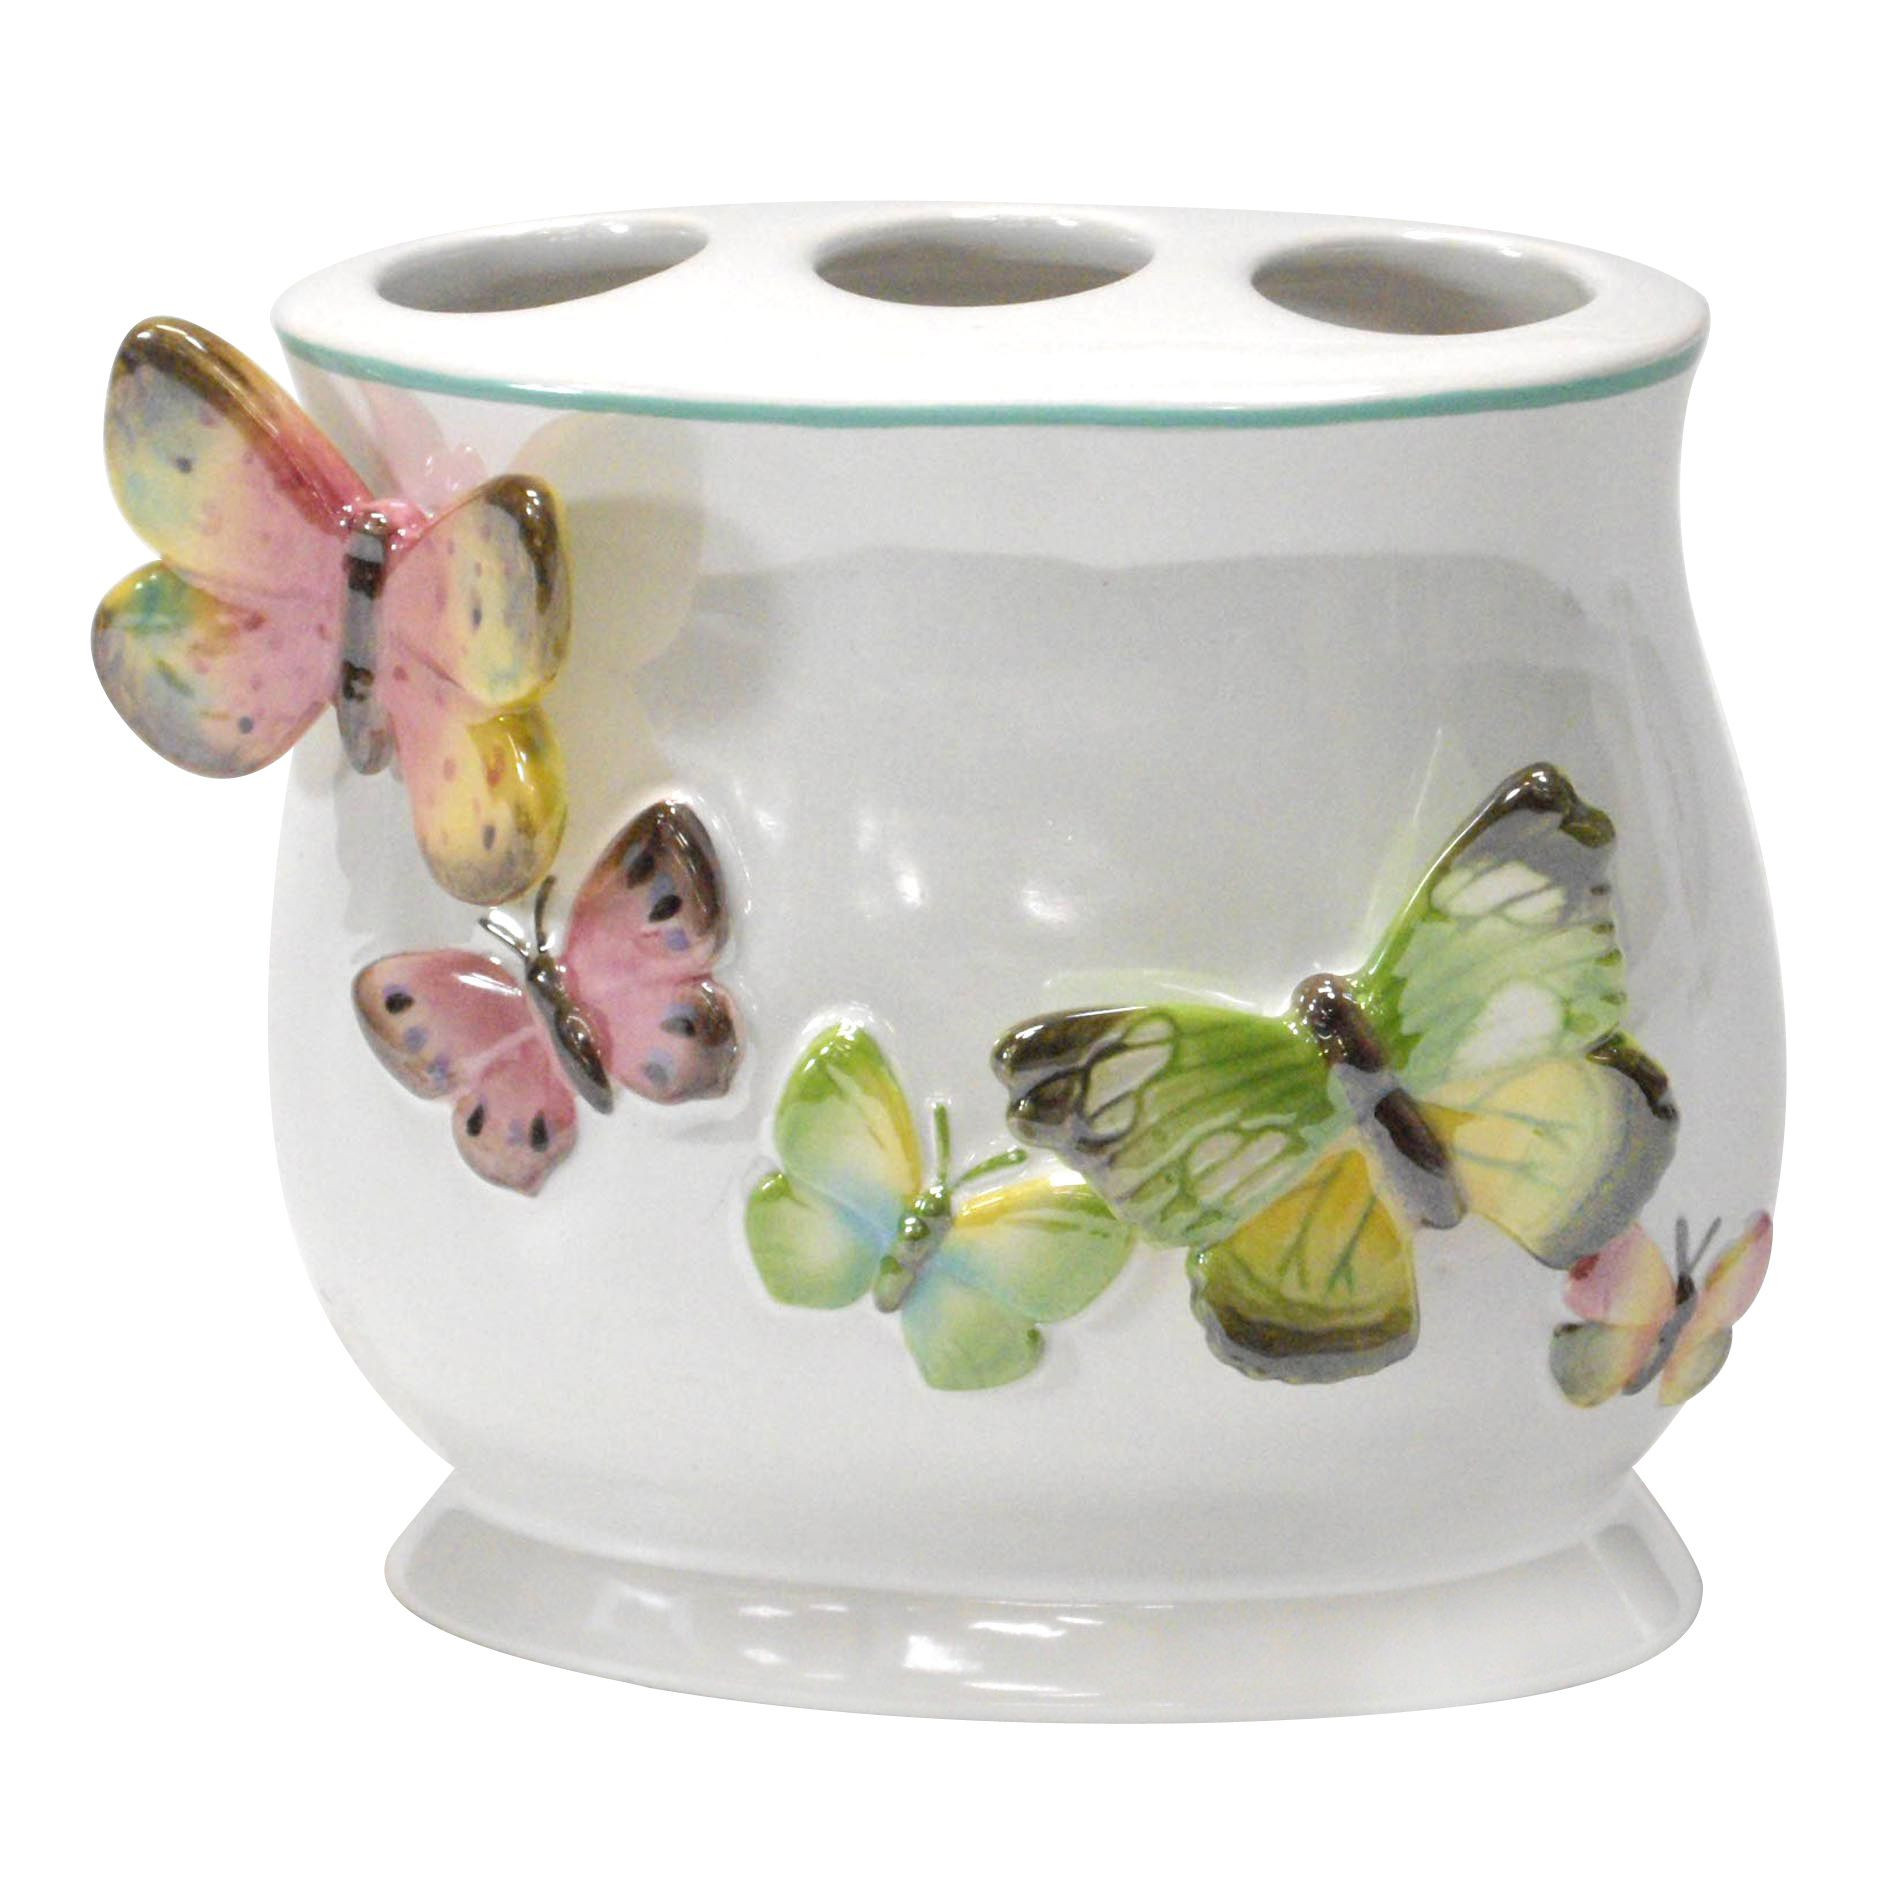 Butterfly Bathroom Decor
 Essential Home Tahka Butterfly Toothbrush Holder